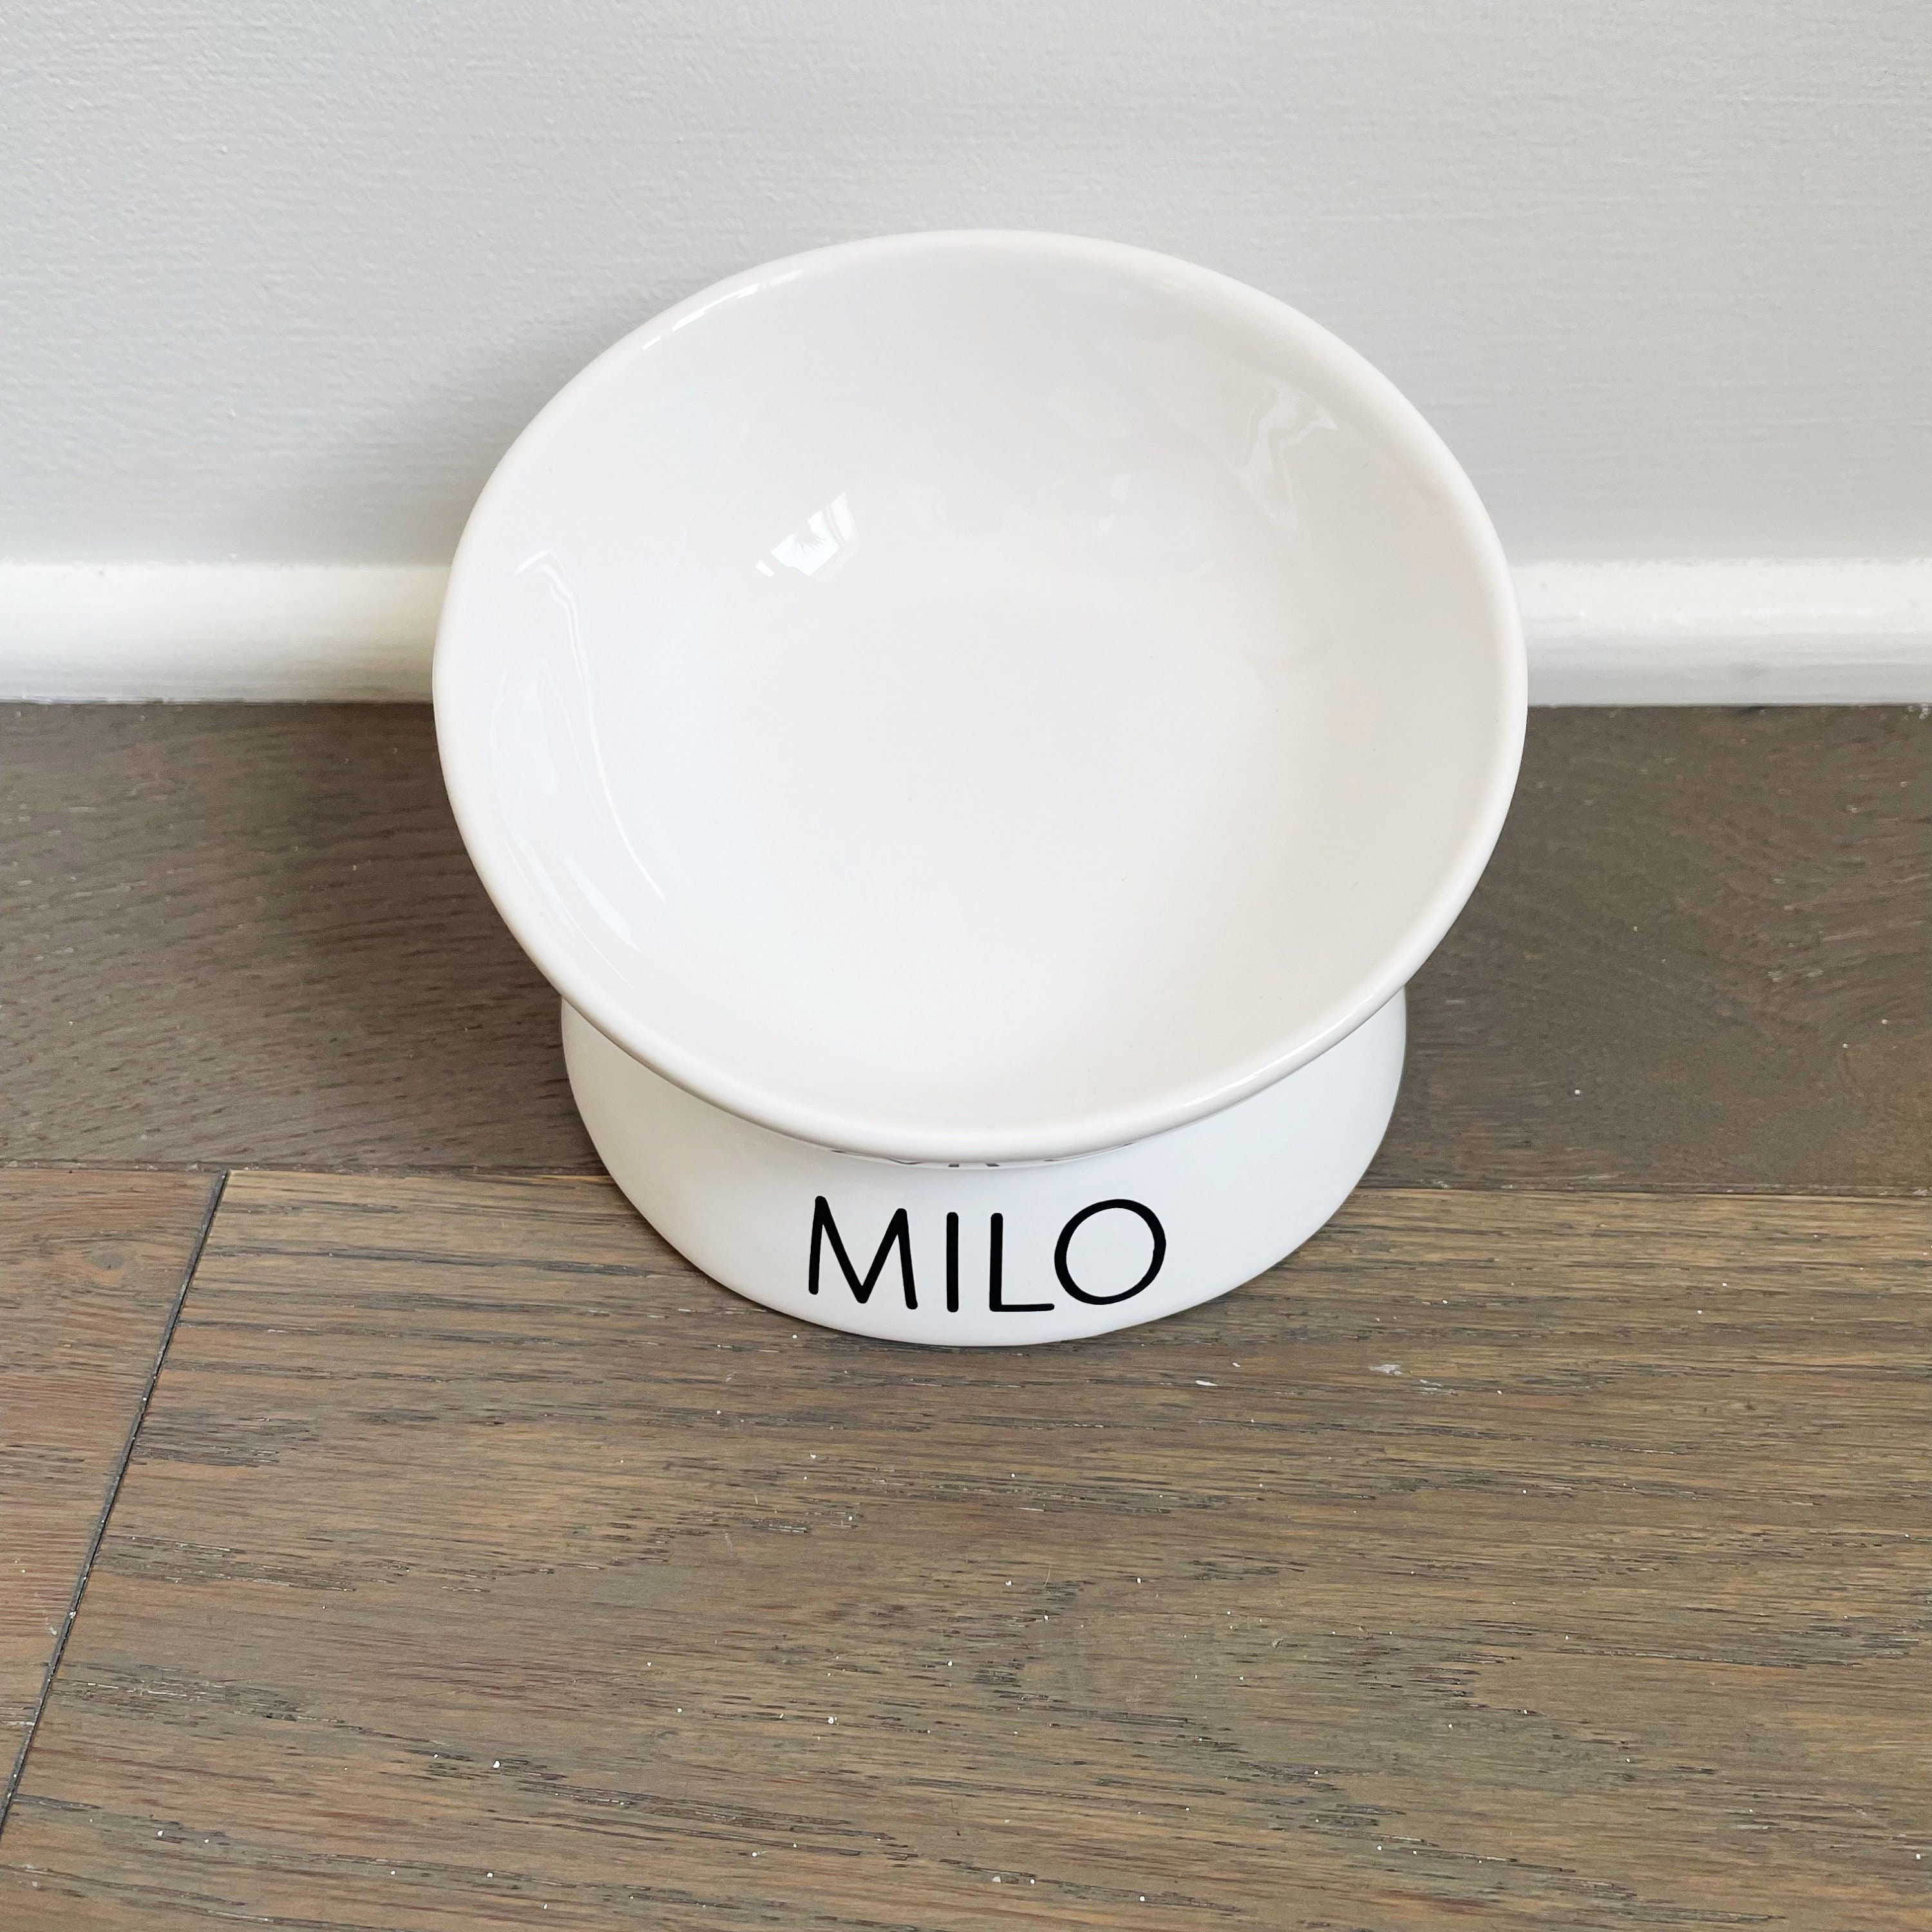 Ceramic Dog Bowl with Wooden Stand - Bone Appétite